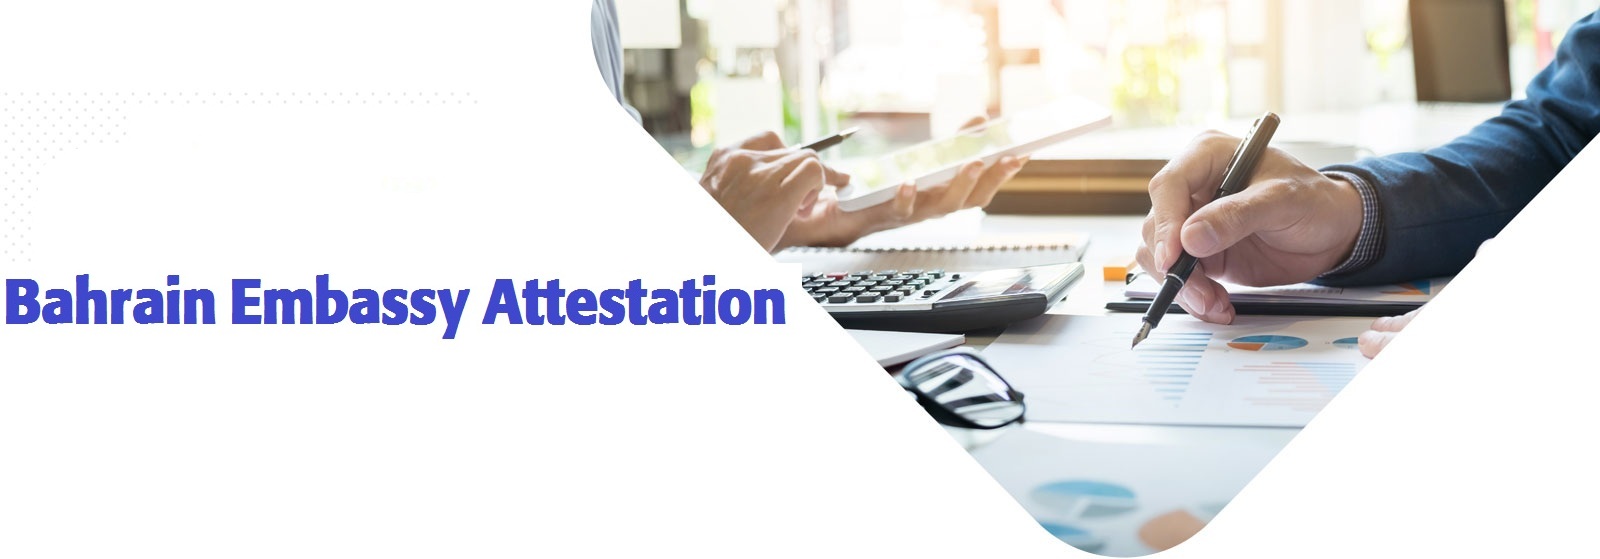 All That You Need To Know About Embassy Attestation for Bahrain